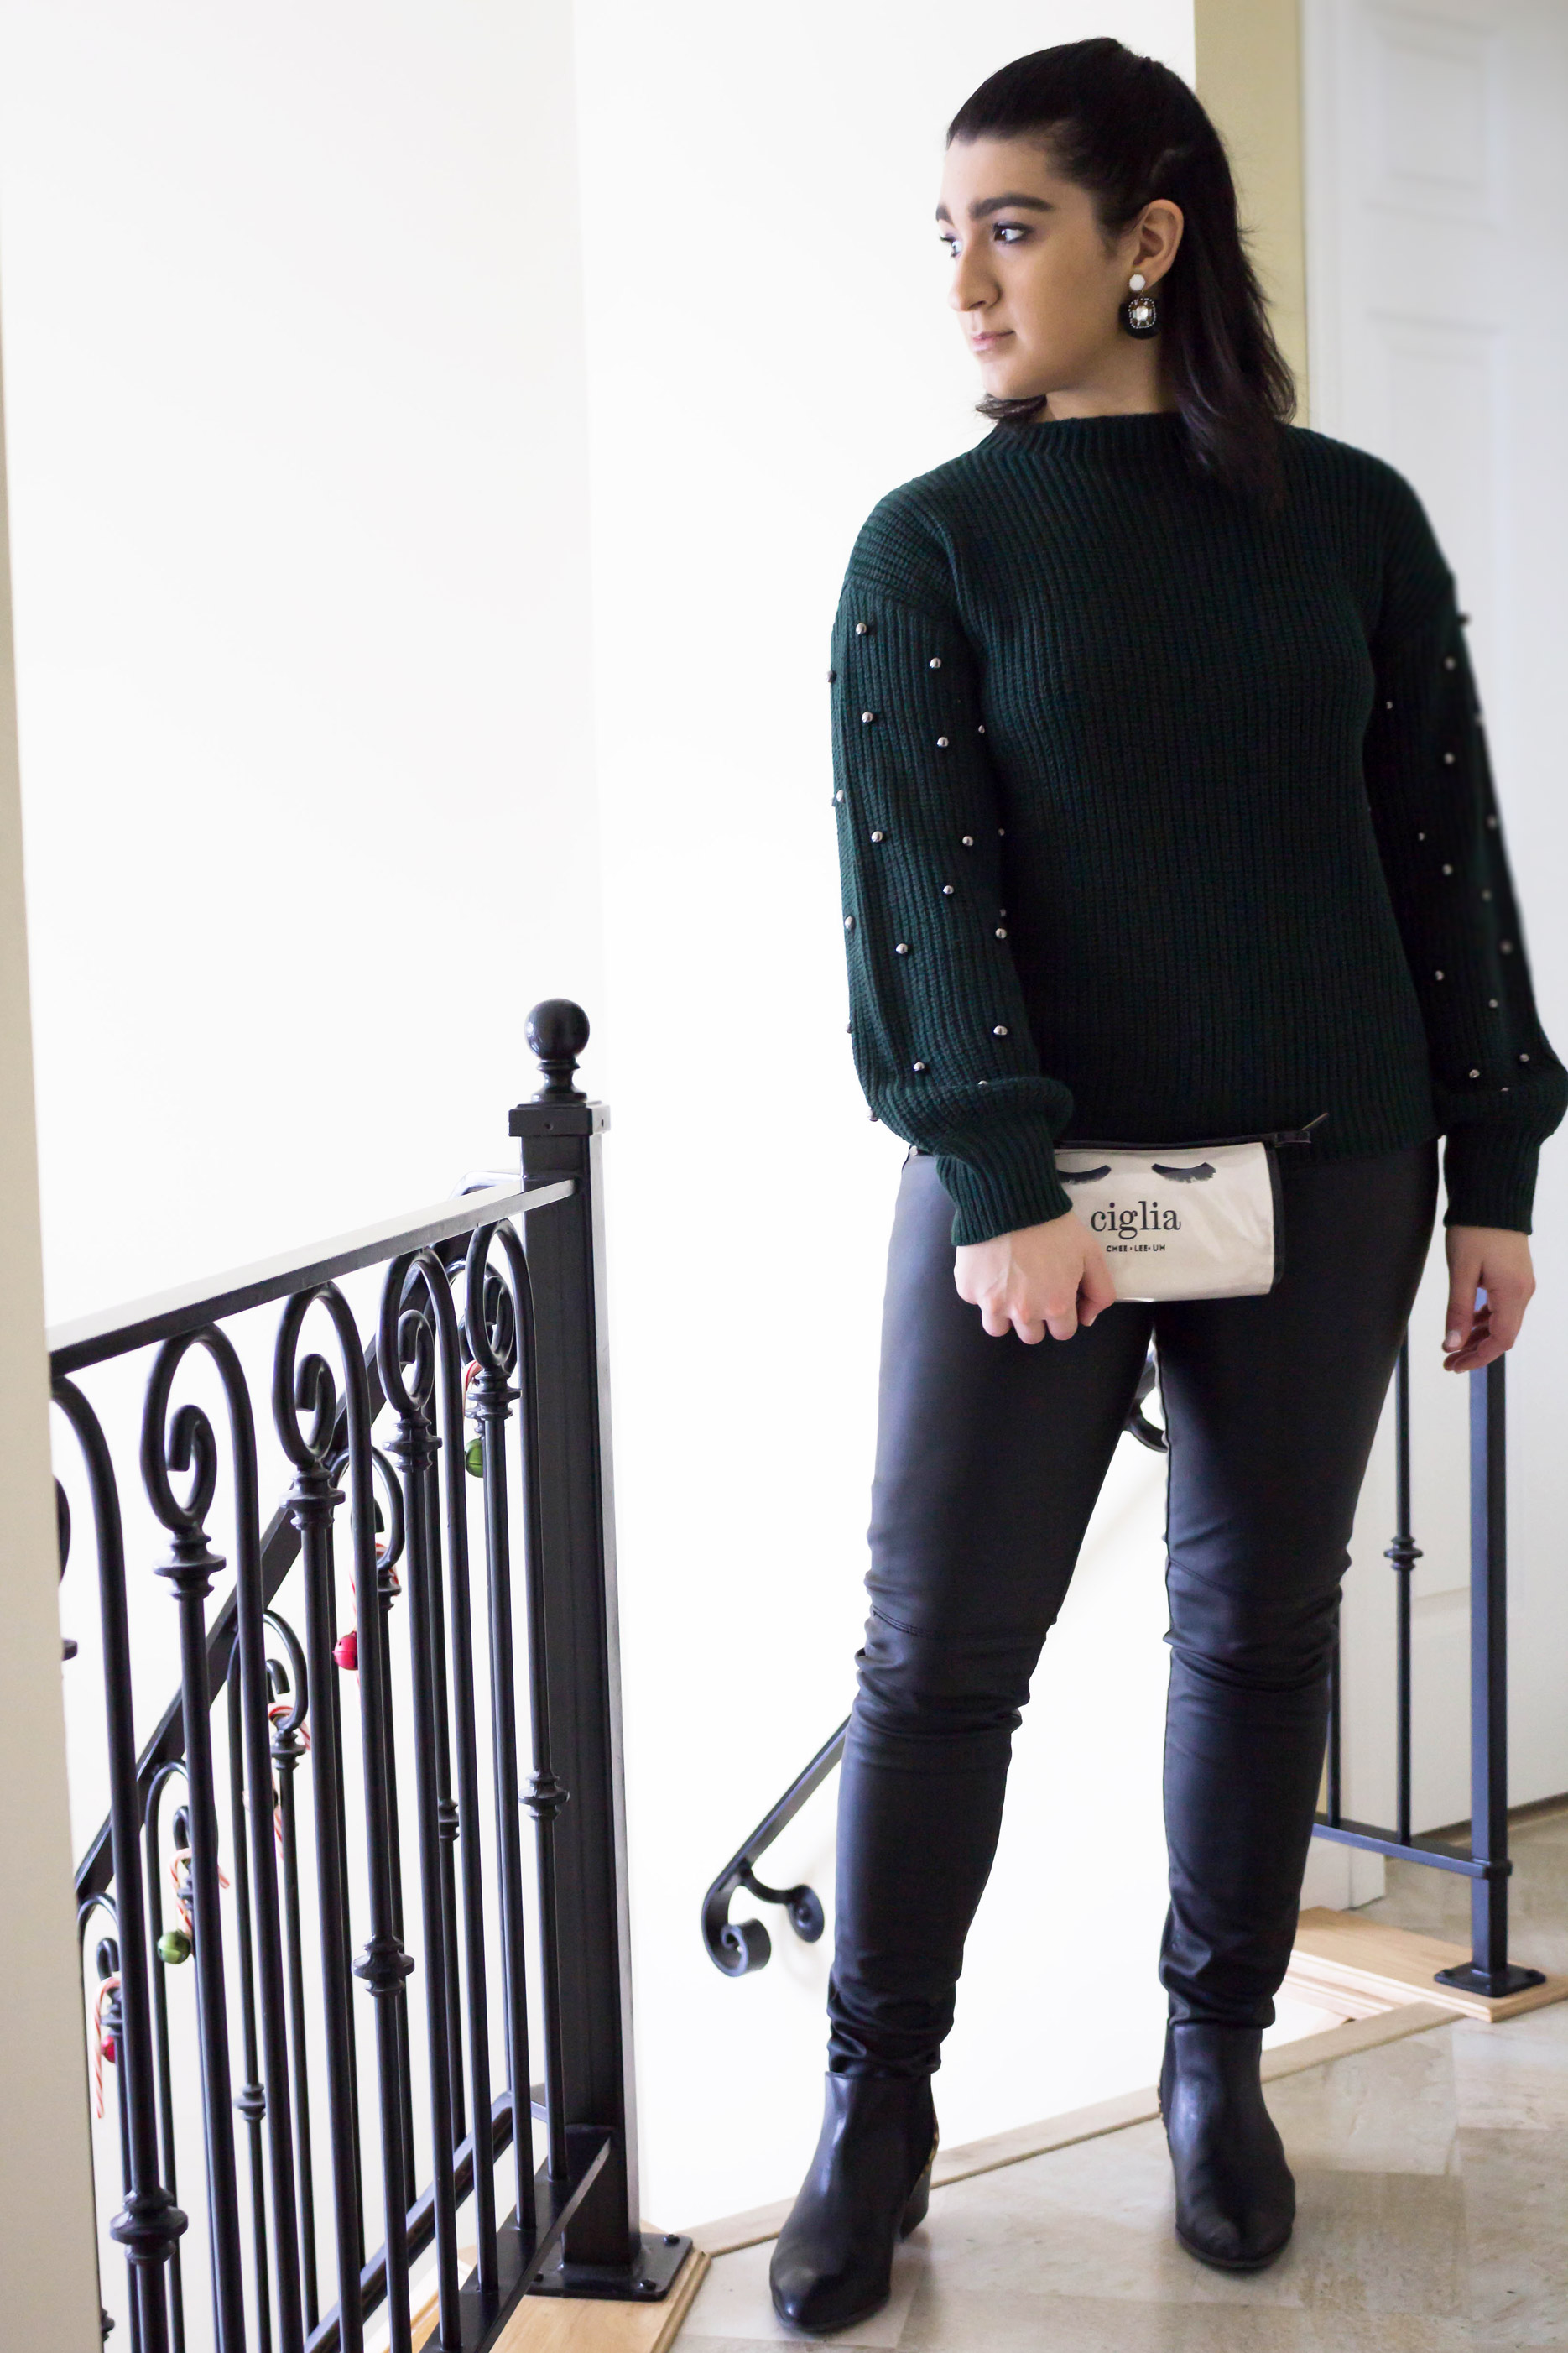 The Perfect Holiday Sweater from JcPenney and Poshmark Update